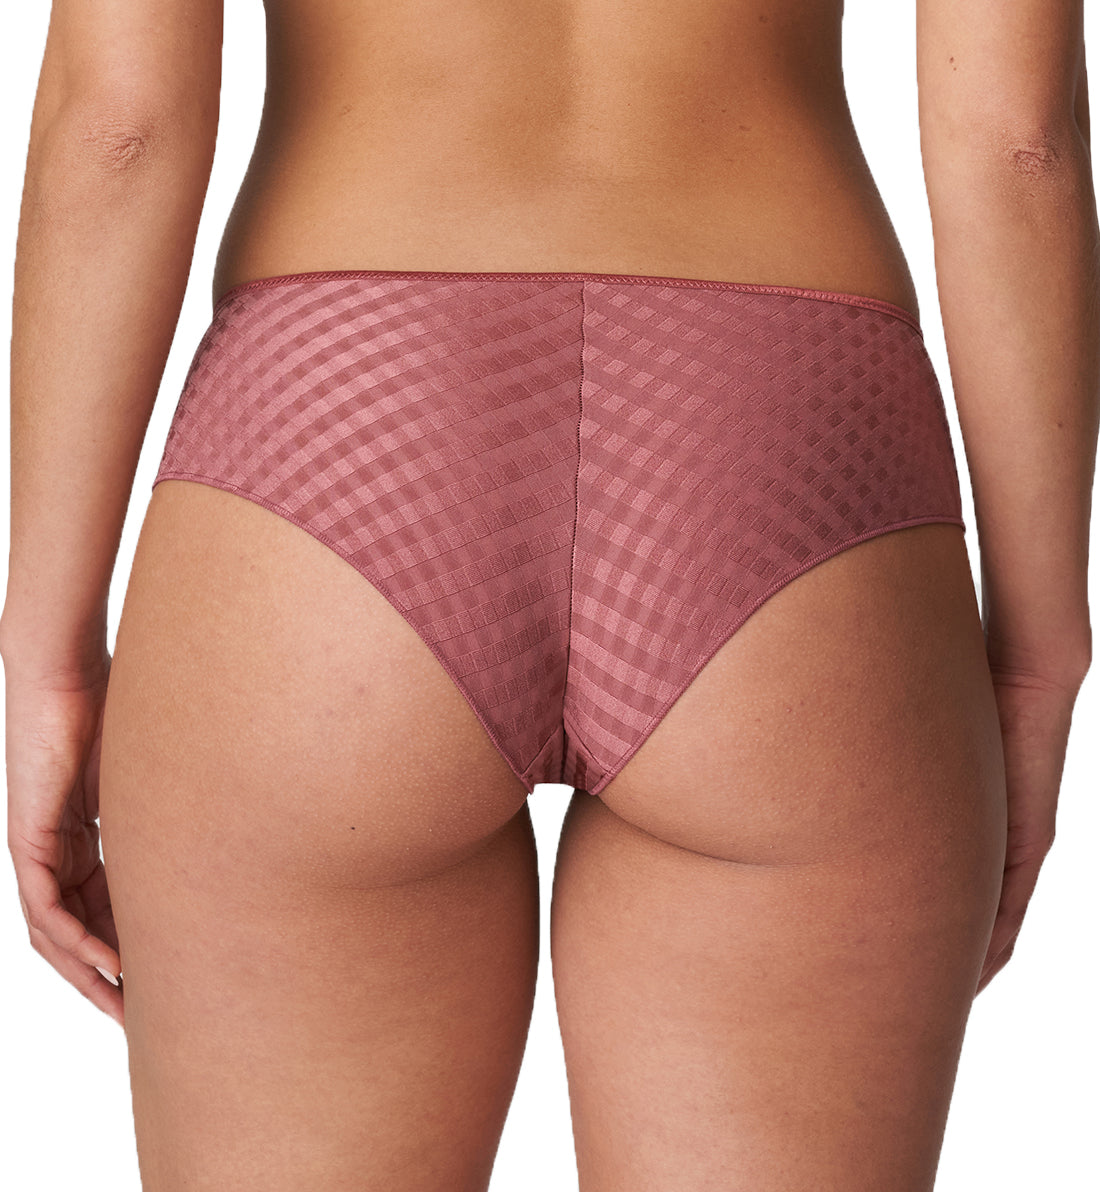 Marie Jo Avero Matching Hotpants Panty (0500415),Small,Wild Ginger - Wild Ginger,Small